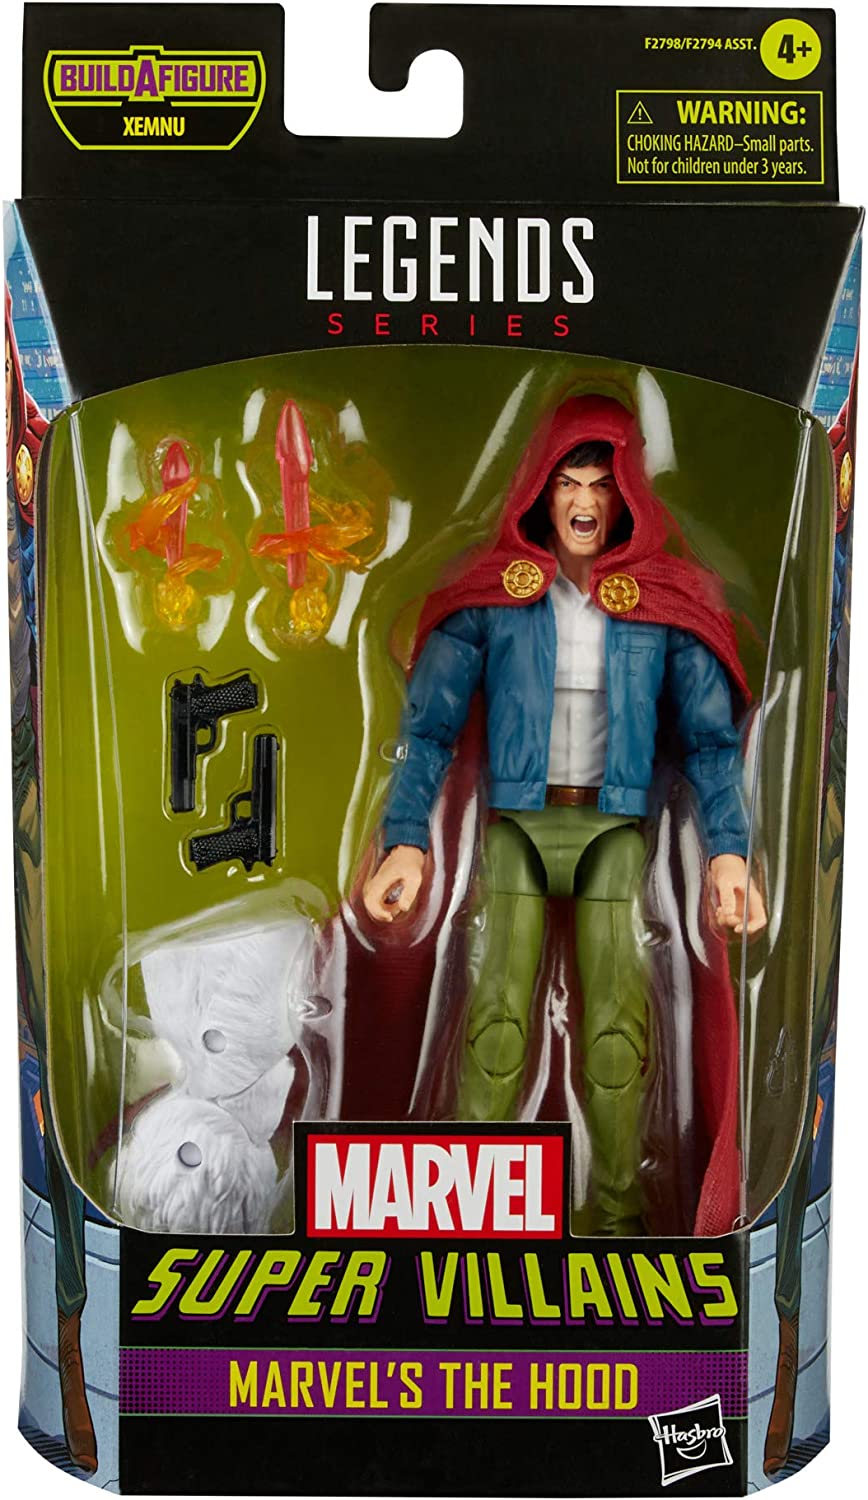  Marvel Hasbro Legends Series 6-inch Collectible Action